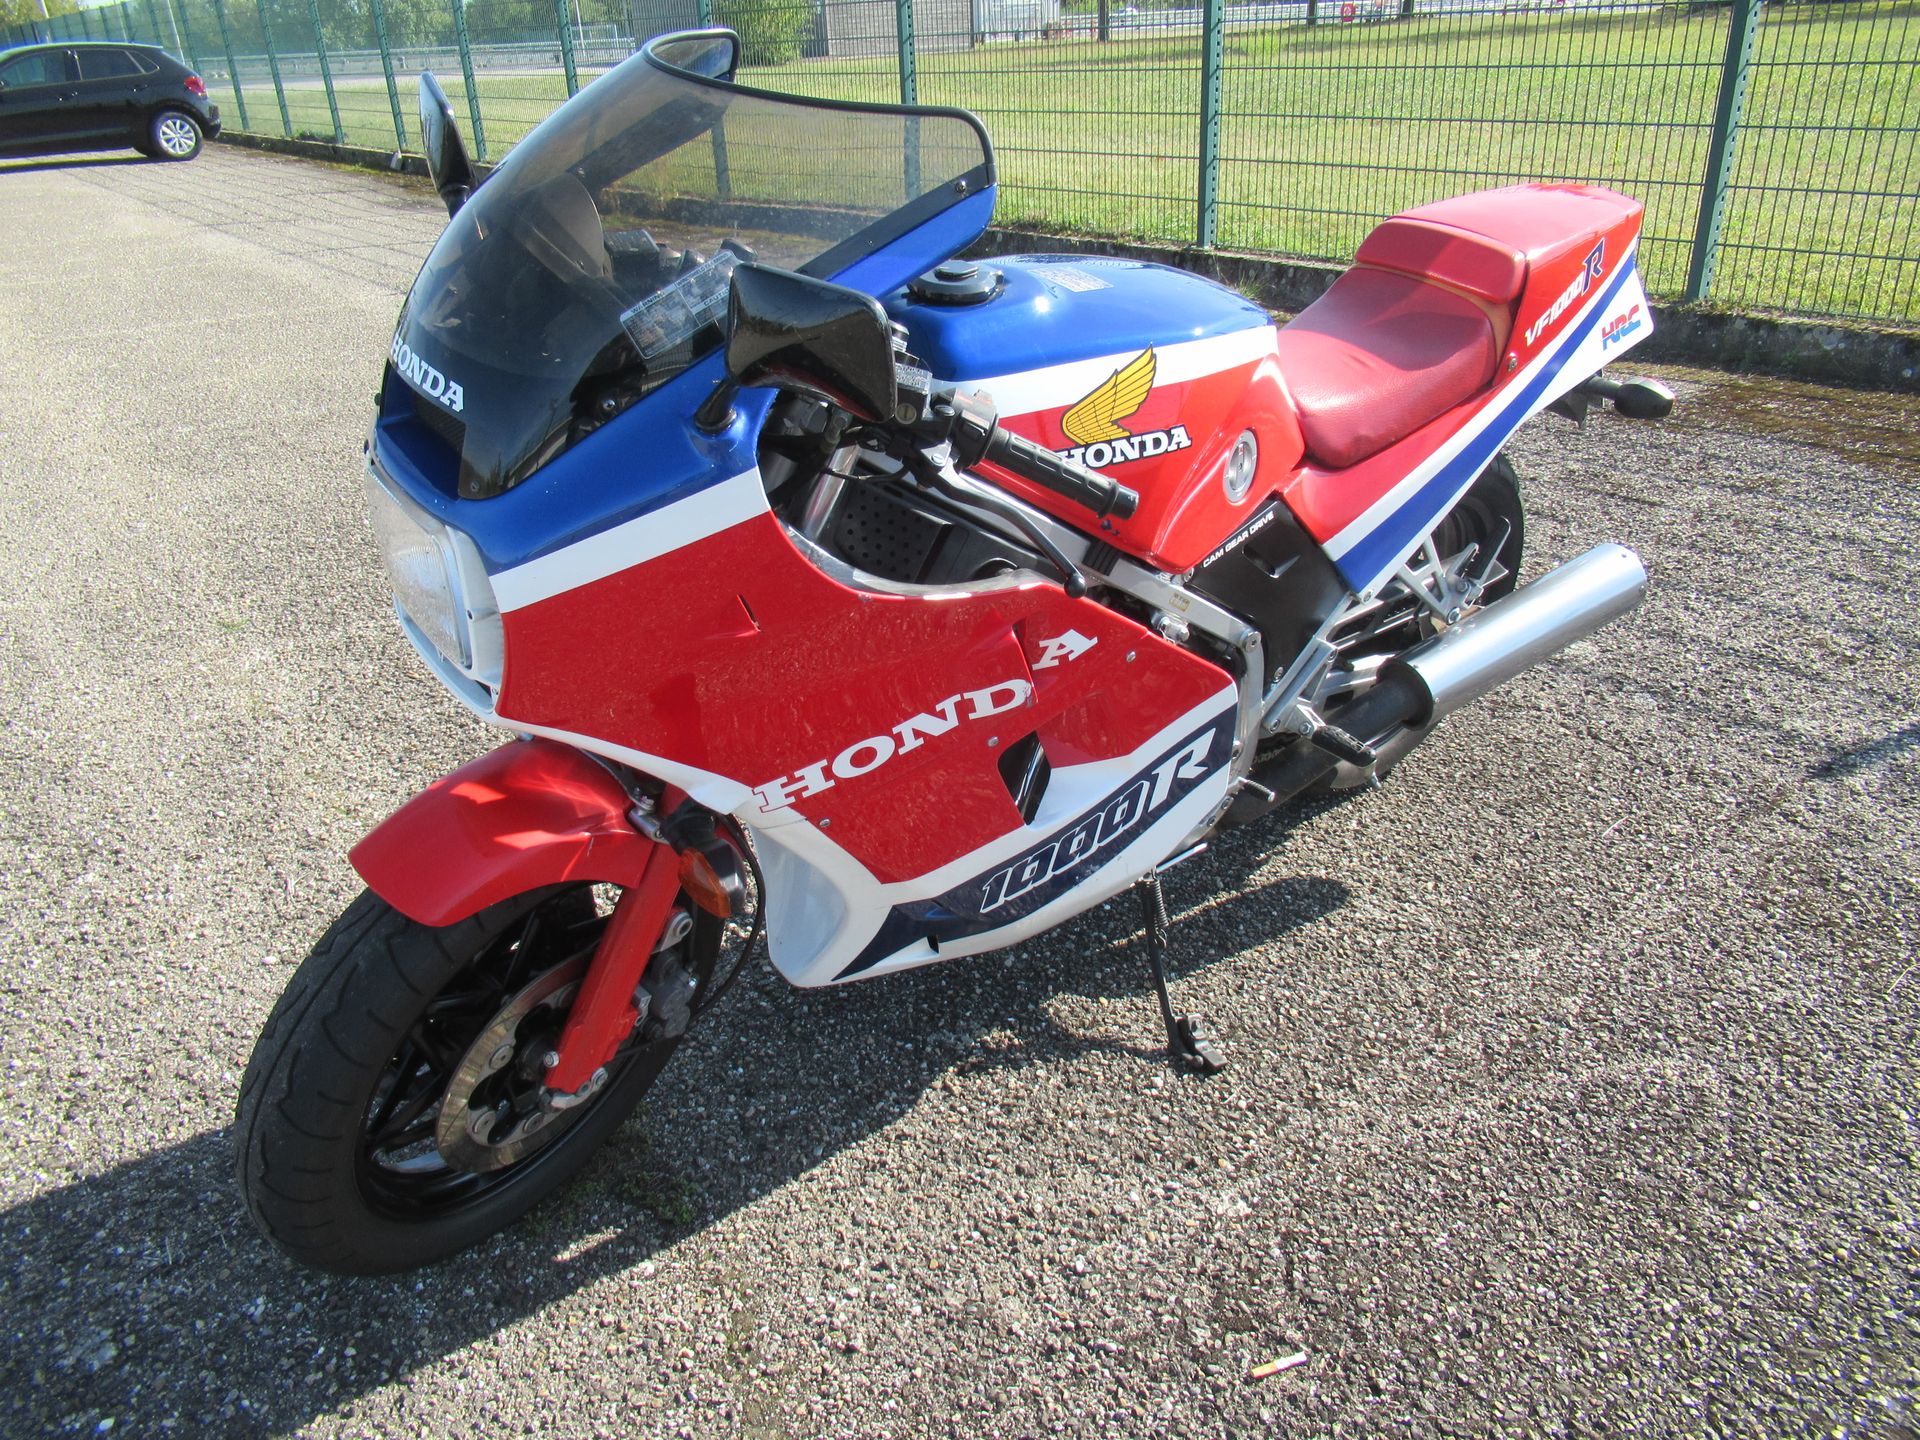 1988 HONDA VF 1000R Just after the CB1100R and just before the RC30 there is the&hellip;